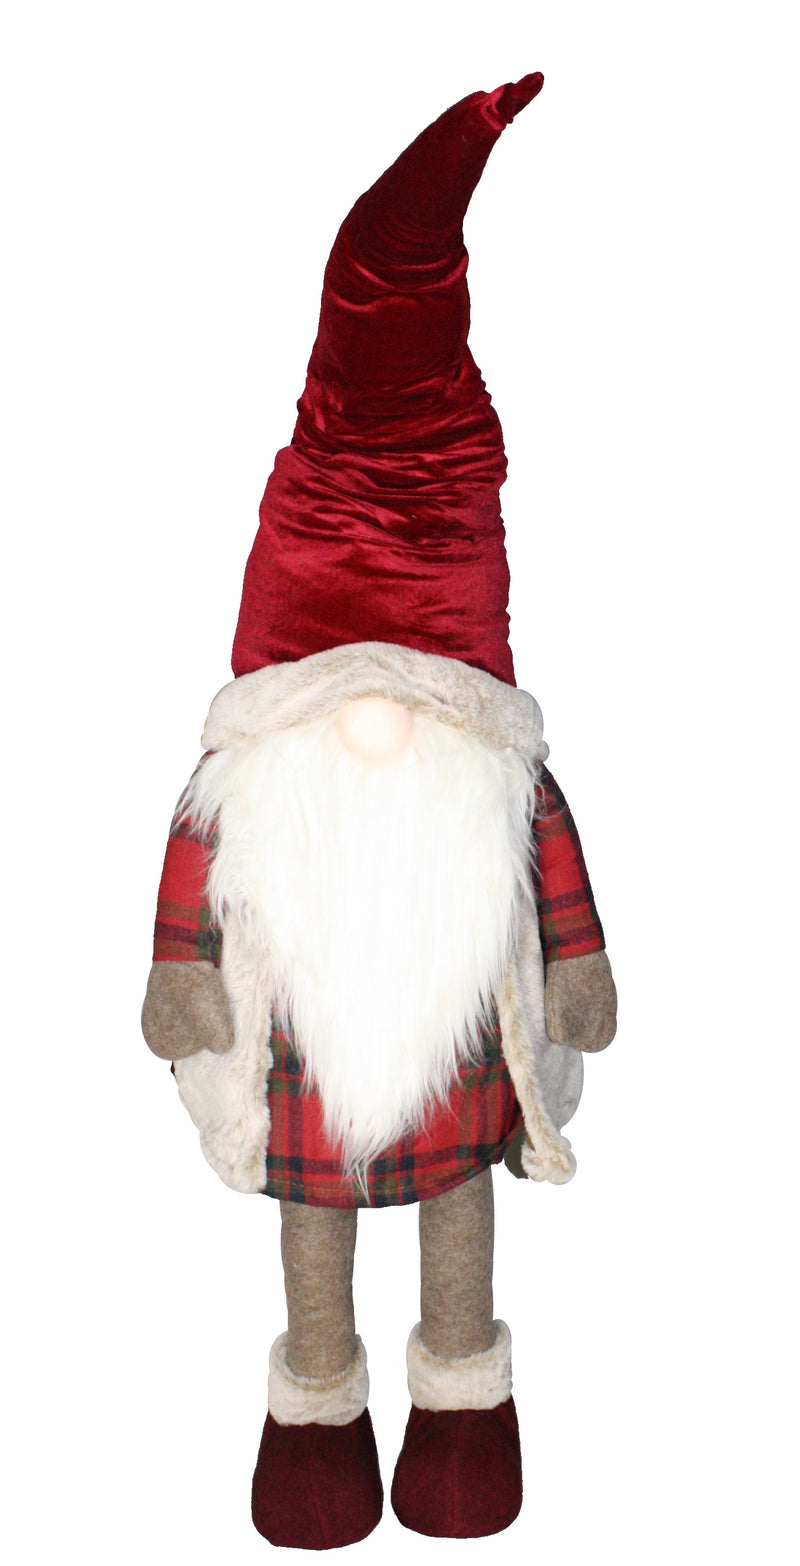 Lighted Bobble Gnome - 53 Inch Tall